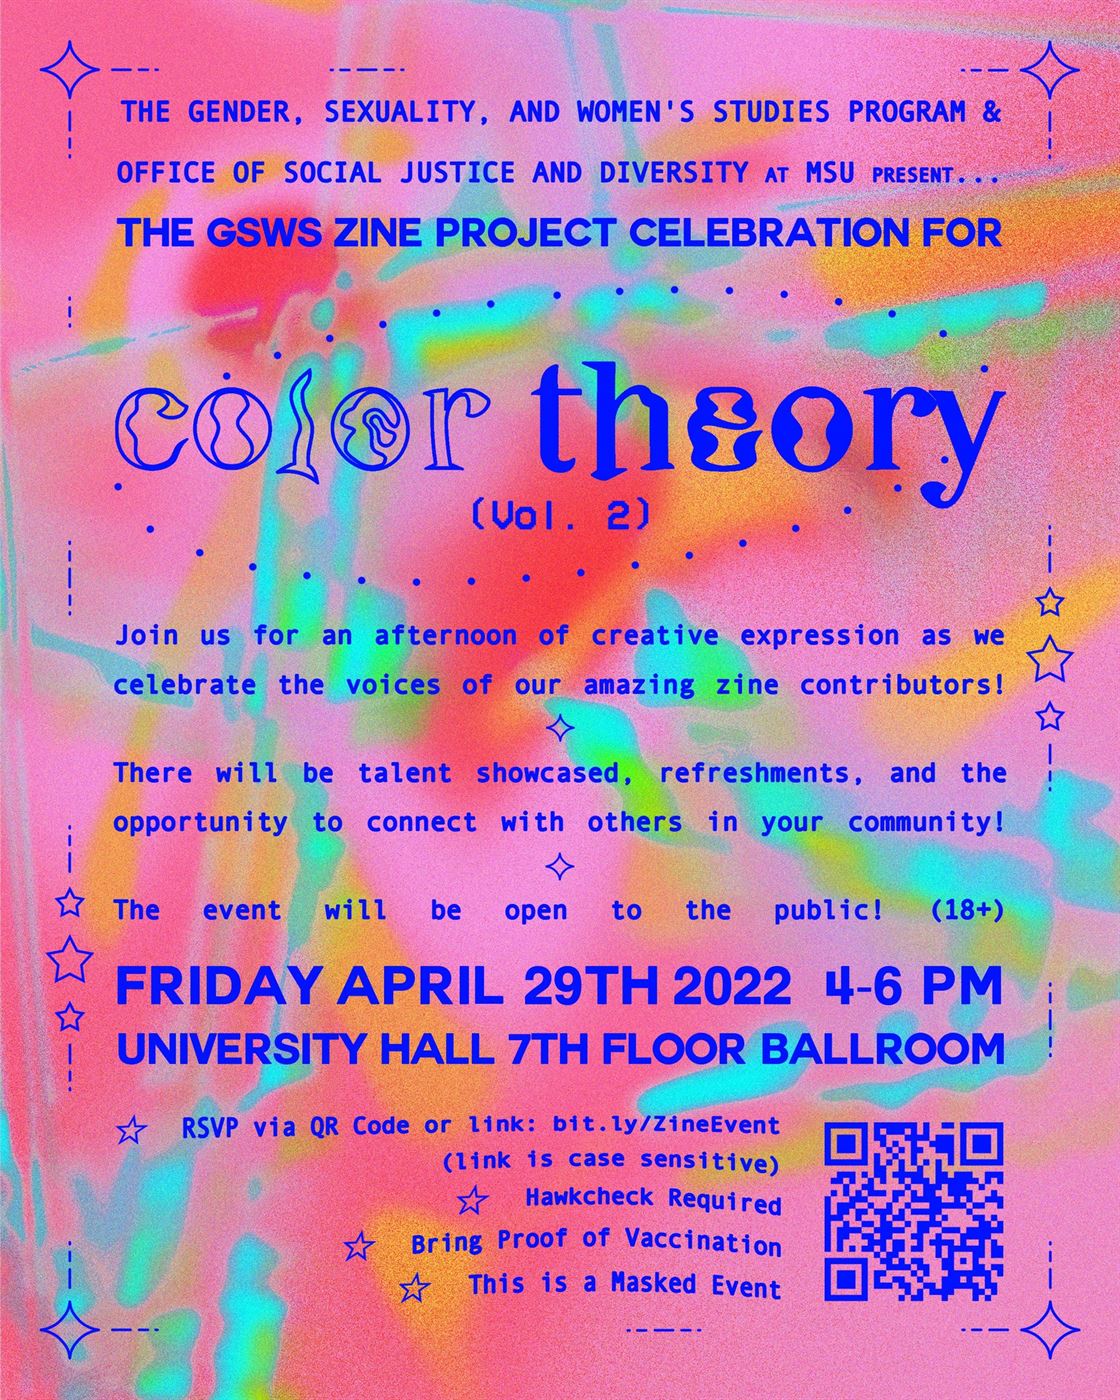 The poster for the celebration of the GSWS Zine Project, Color Theory. Photo courtesy of Emma Hot